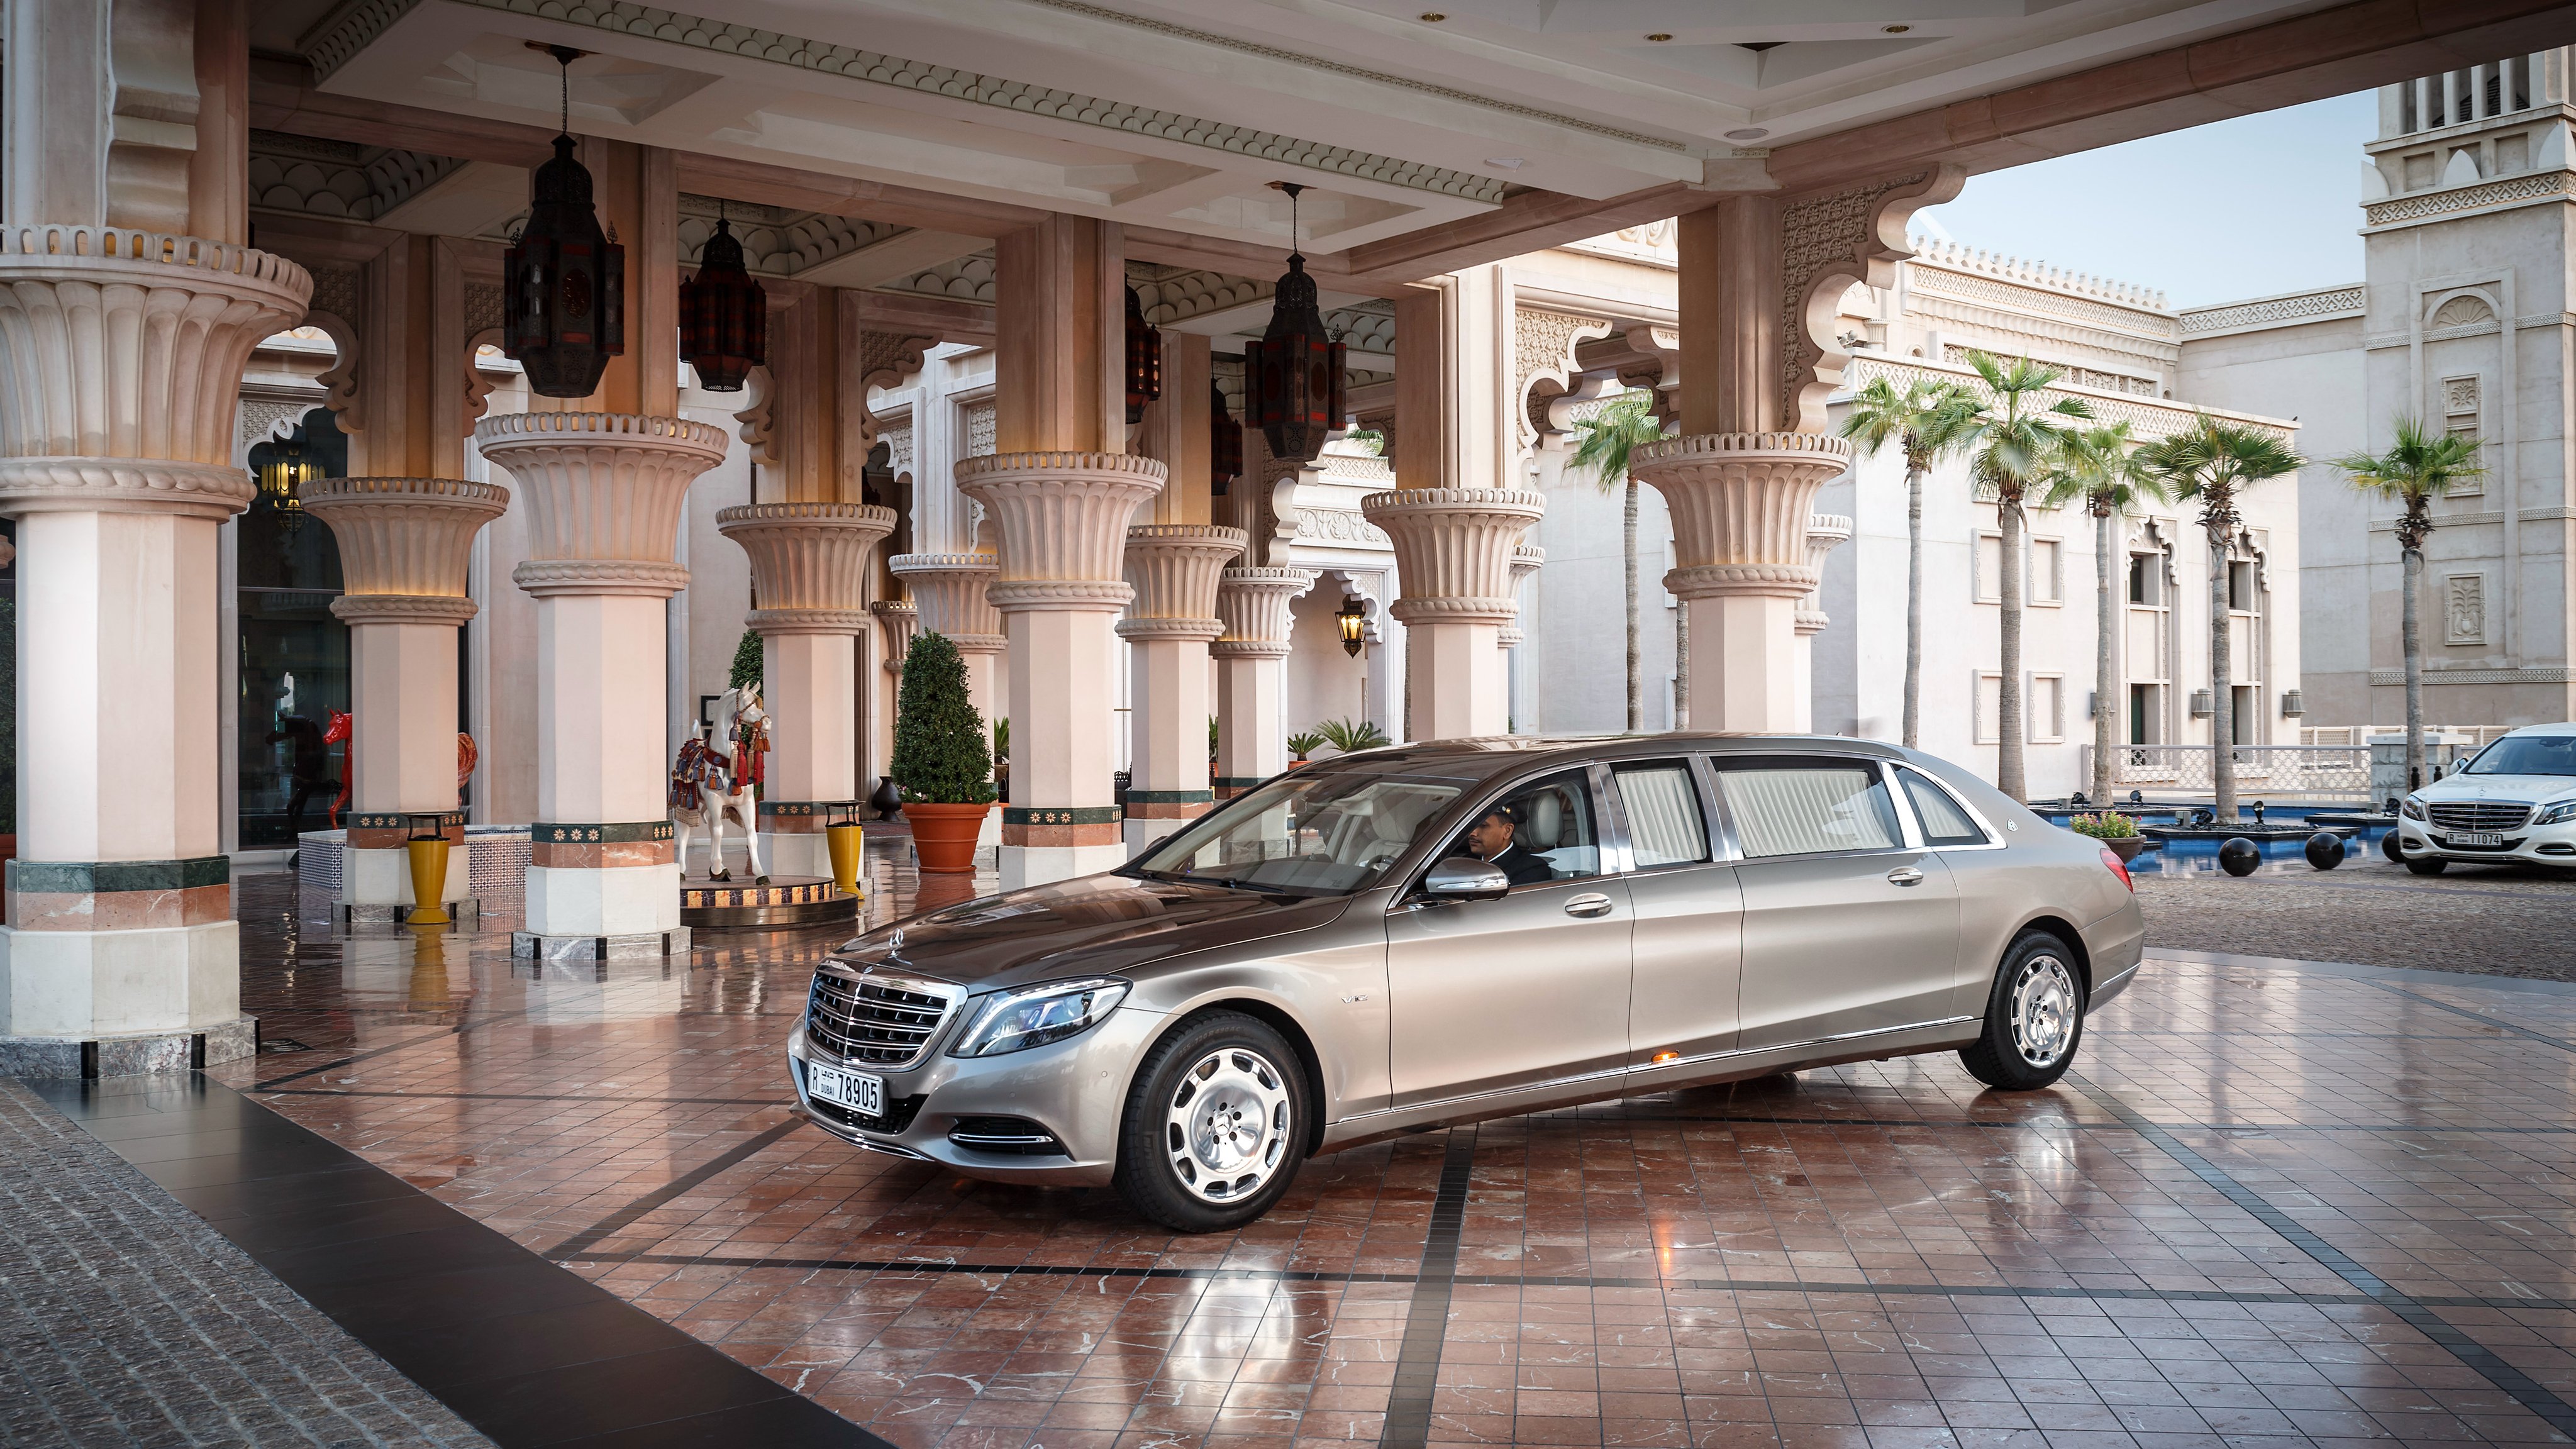 mercedes, Maybach, Pullman, S600,  vv222 , Cars, Limo, Luxury, 2016 Wallpaper